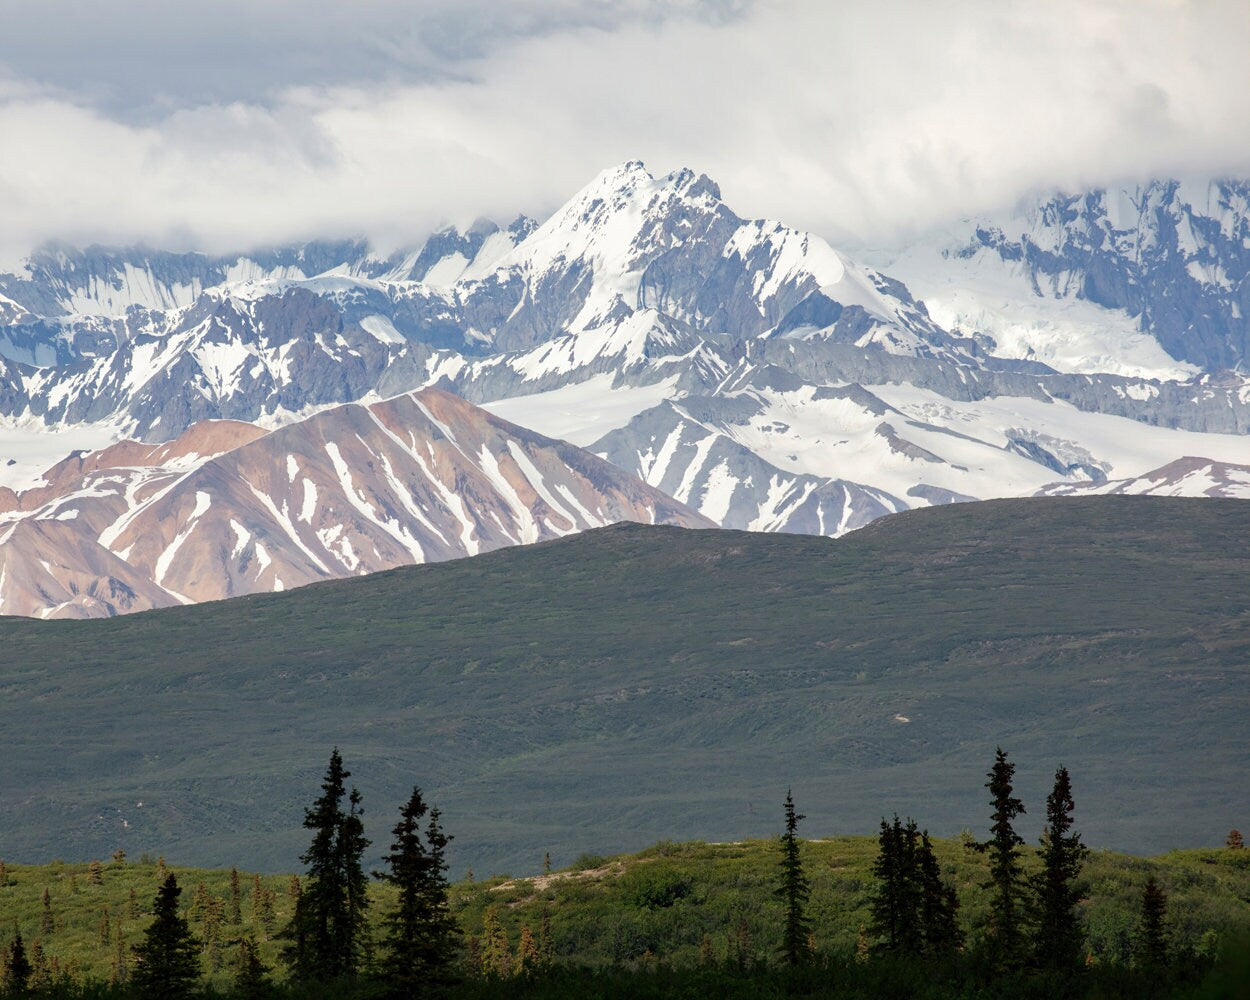 Alaska photo print, Denali Highway mountains photo, mountain photography, wall art decor, large paper or canvas picture, 5x7 to 40x60"